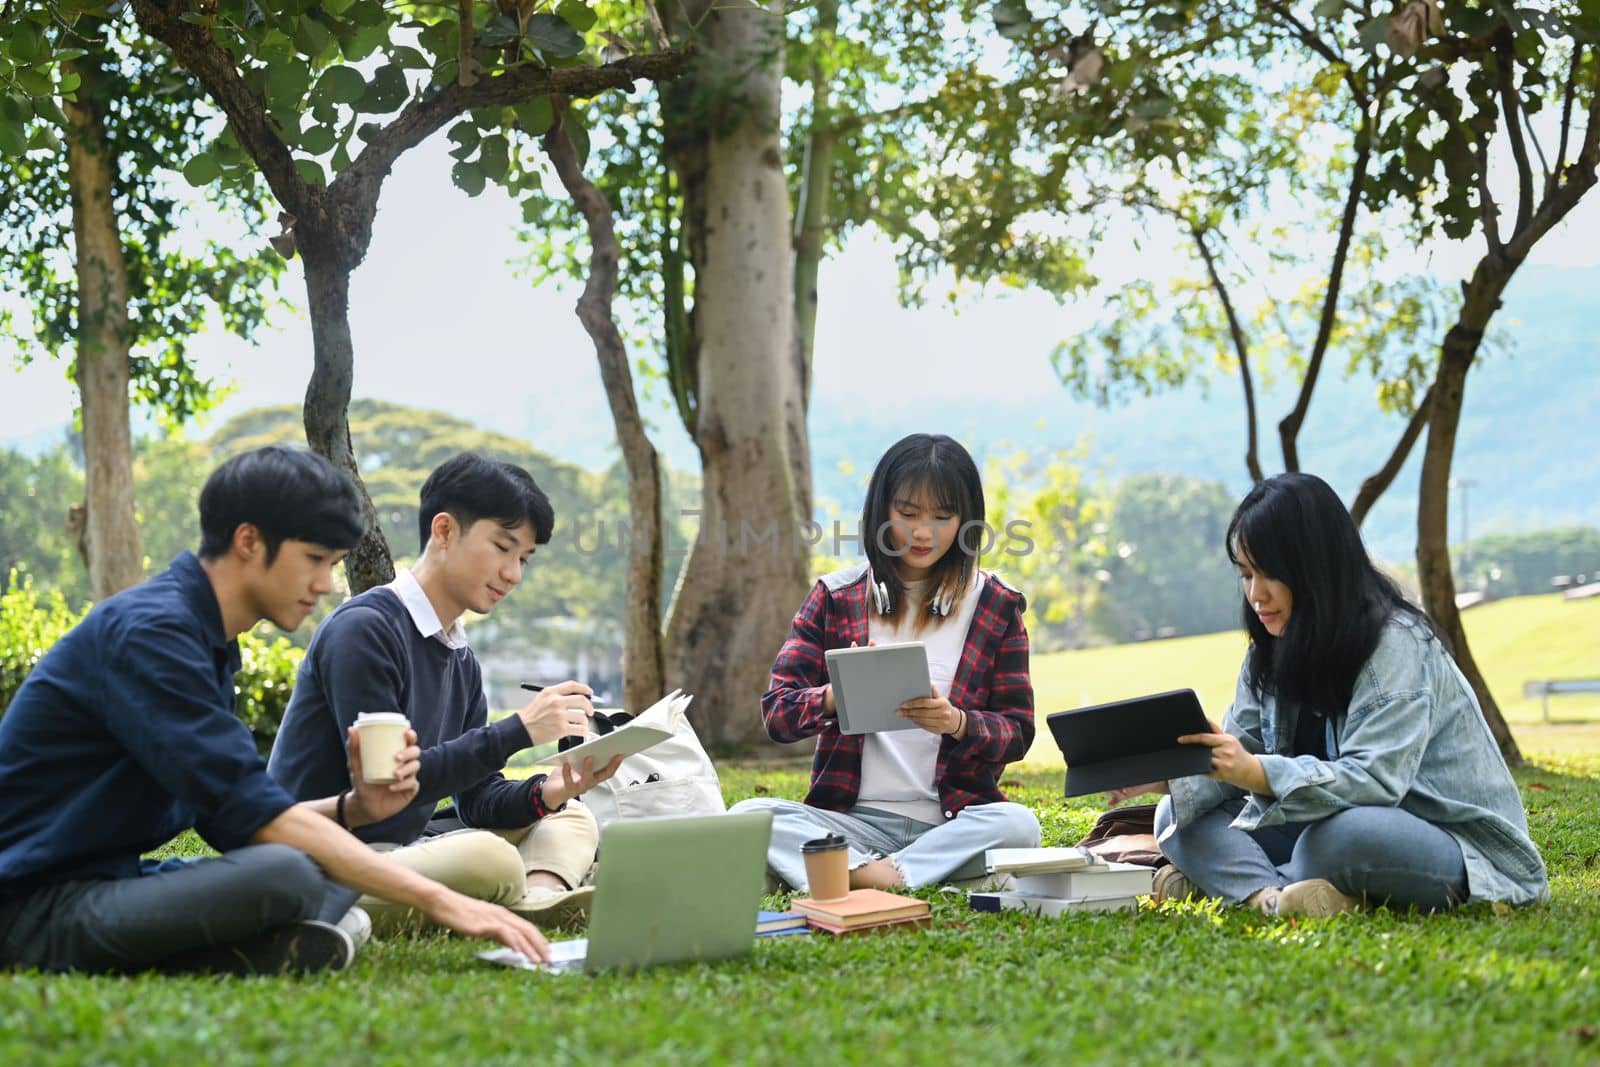 Young Asian college students working on group project and communicating while sitting on on campus lawn on beautiful day.